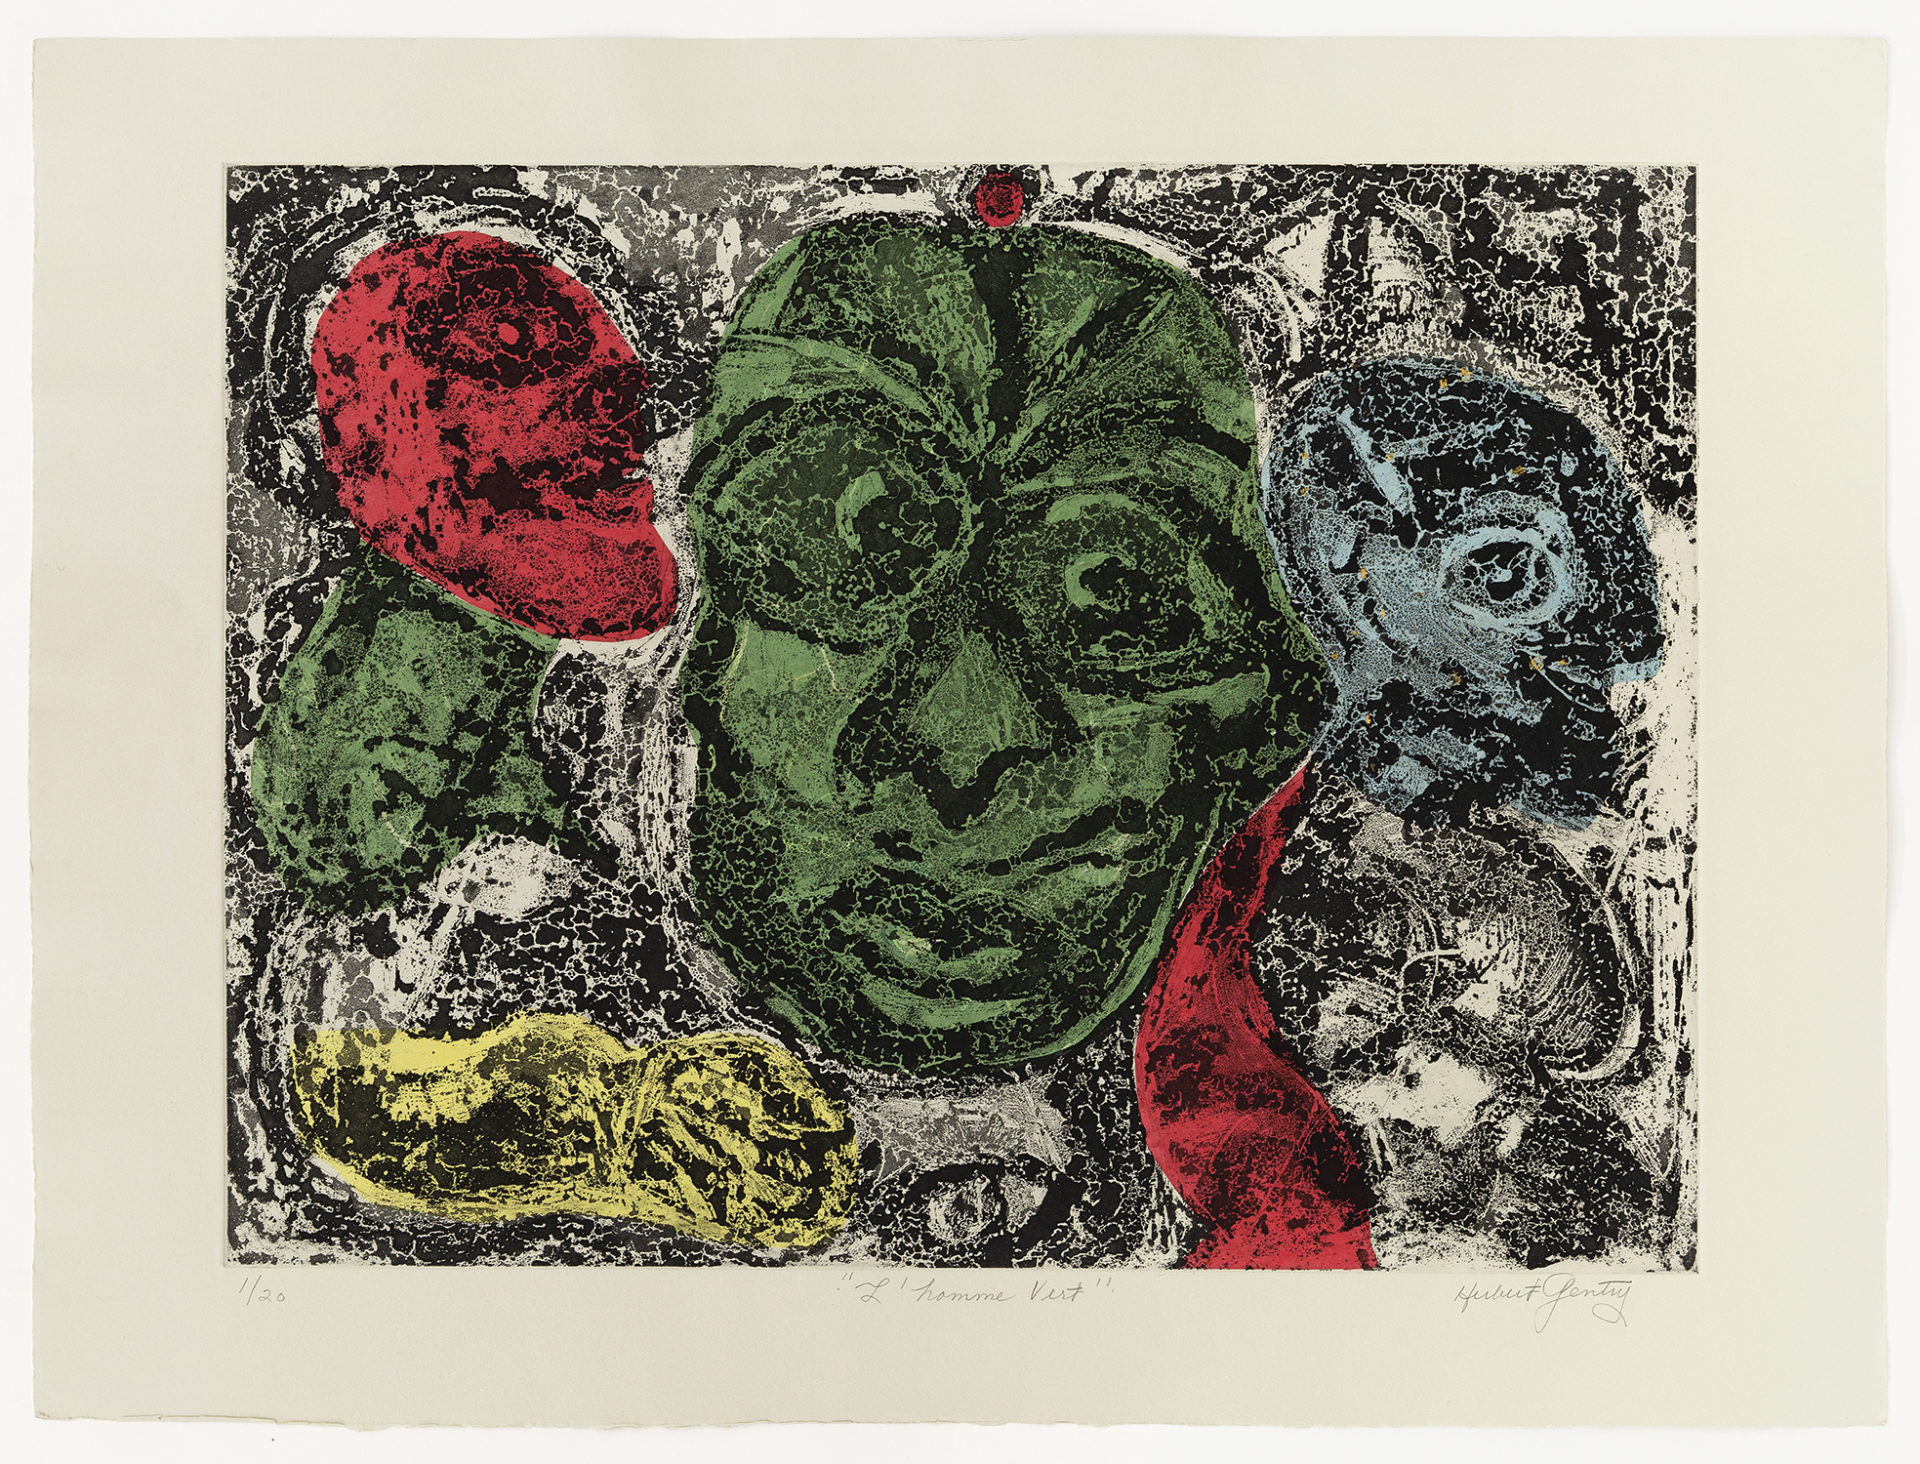 L'Homme Vert, 1993, Etching with chine-collé22 x 30 inches (55.9 x 76.2 cm), Edition of 20